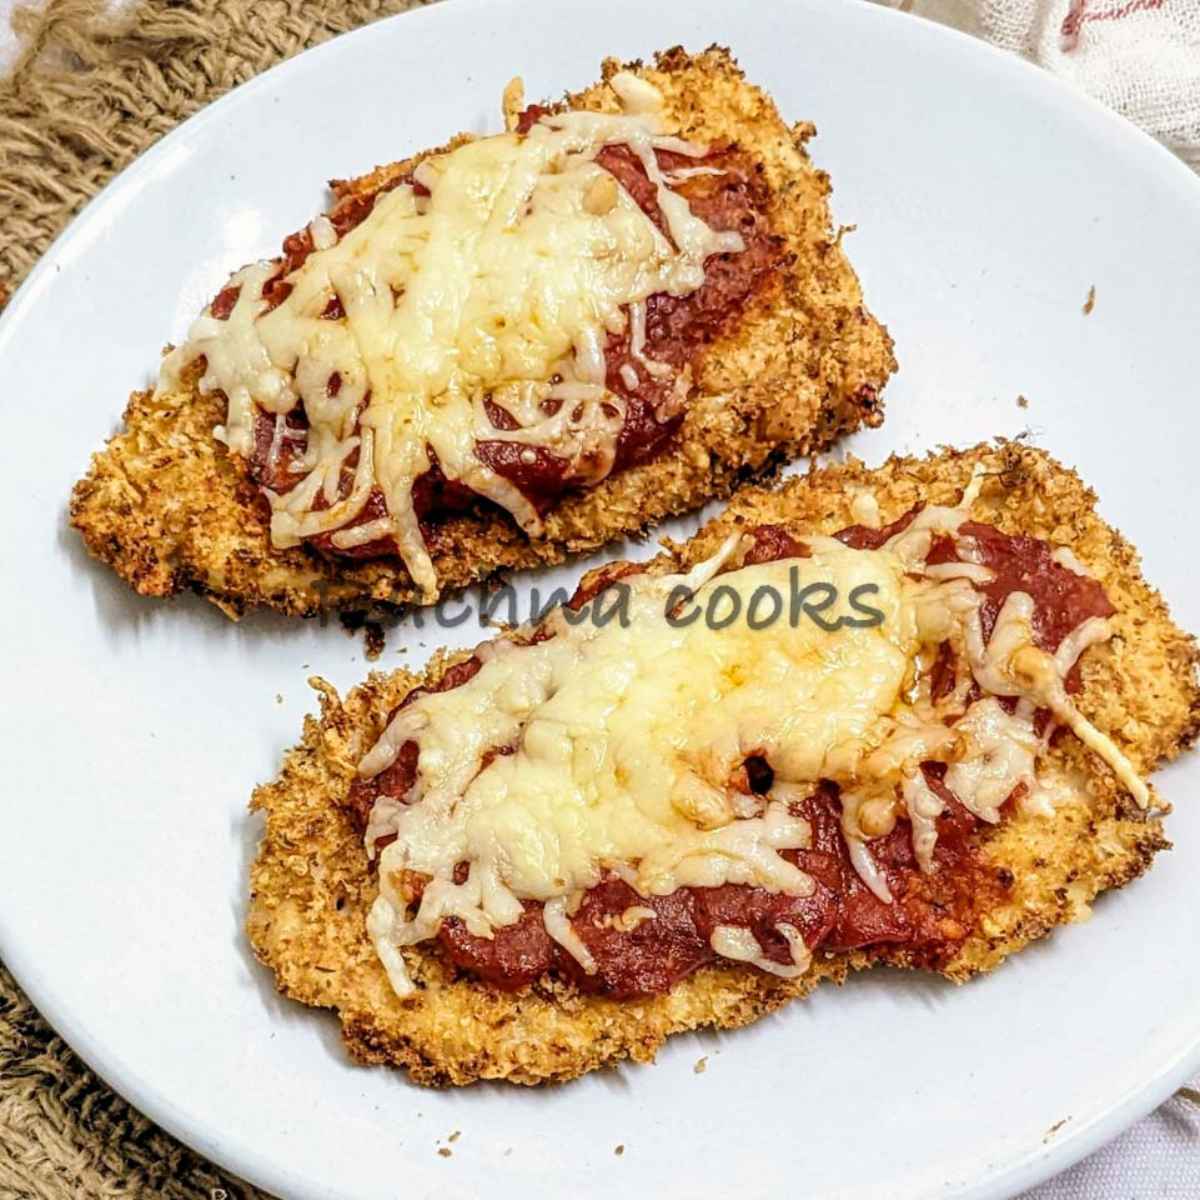 Chicken parmesan served on a white plate.